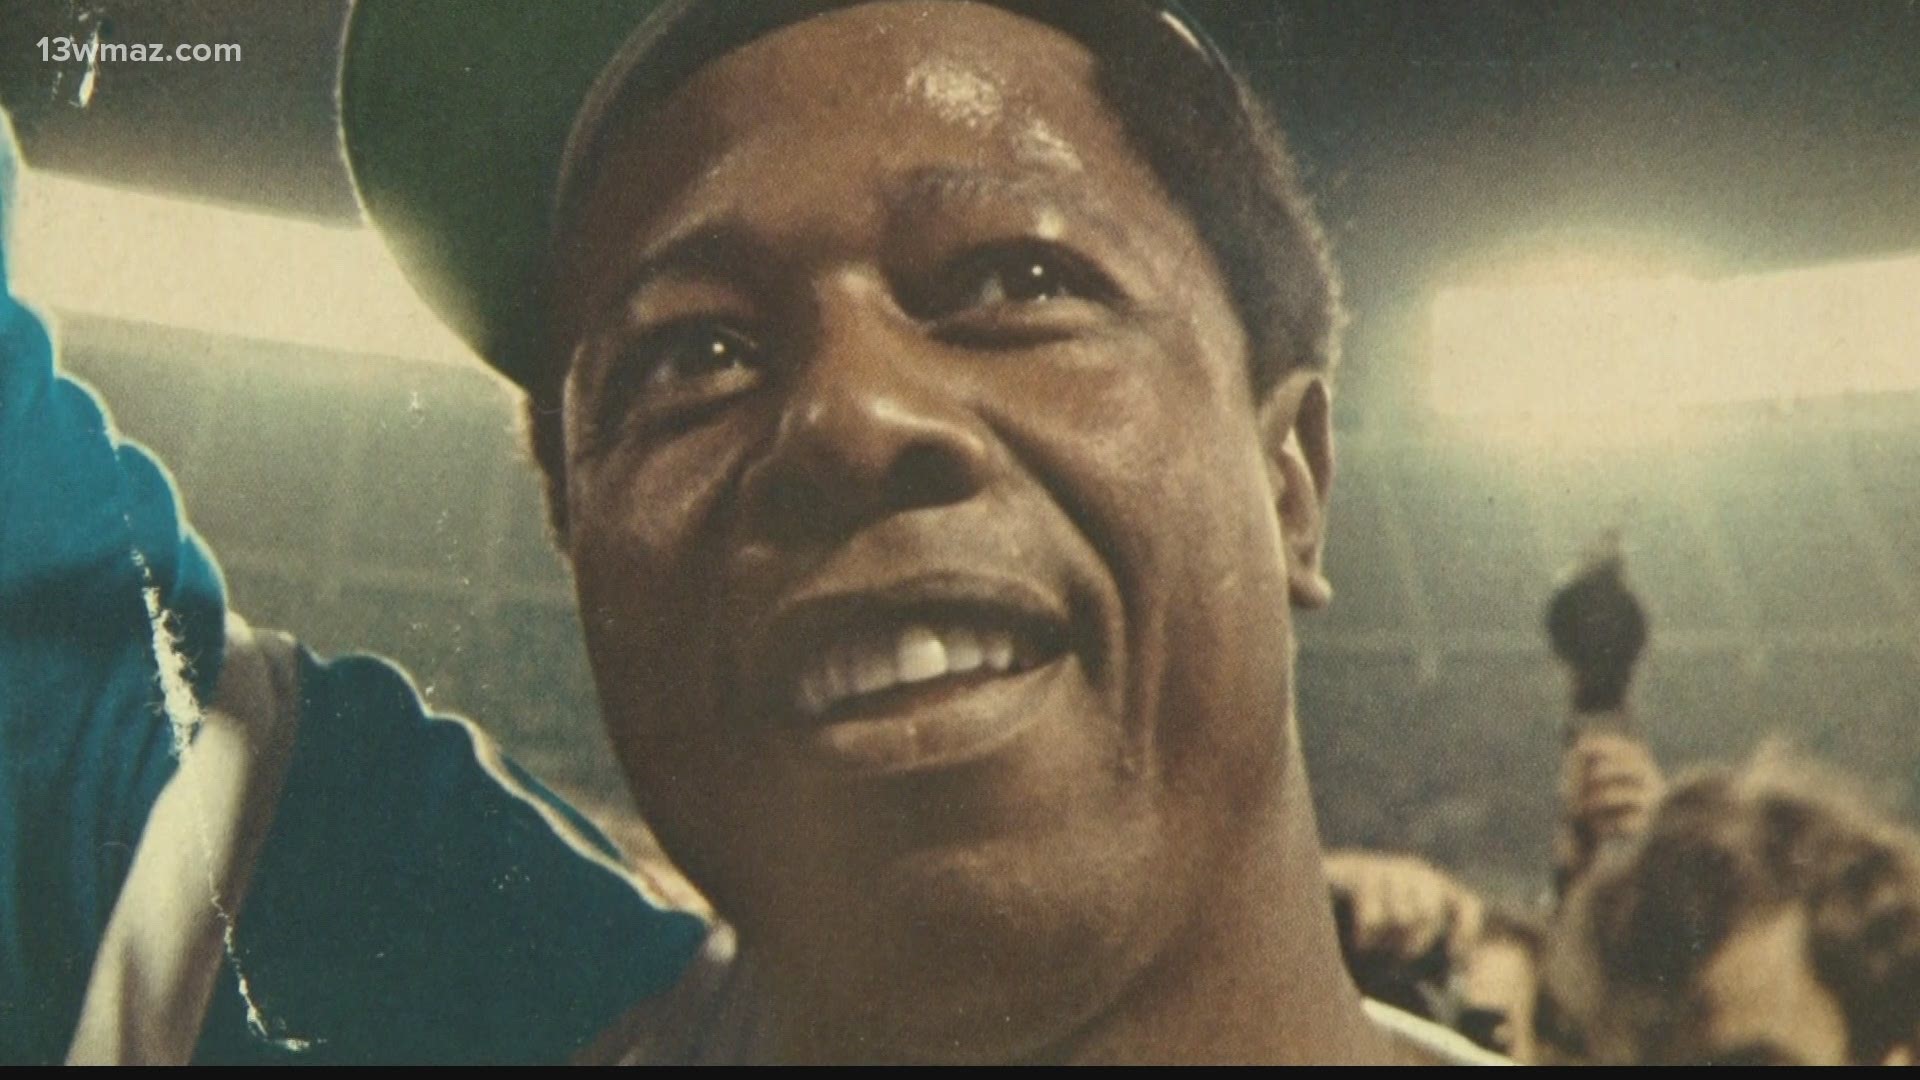 To many around the world, Henry "Hank" Aaron was "Hammerin' Hank," the sports icon who broke Babe Ruth's homerun record, but here in Georgia he was more than that.